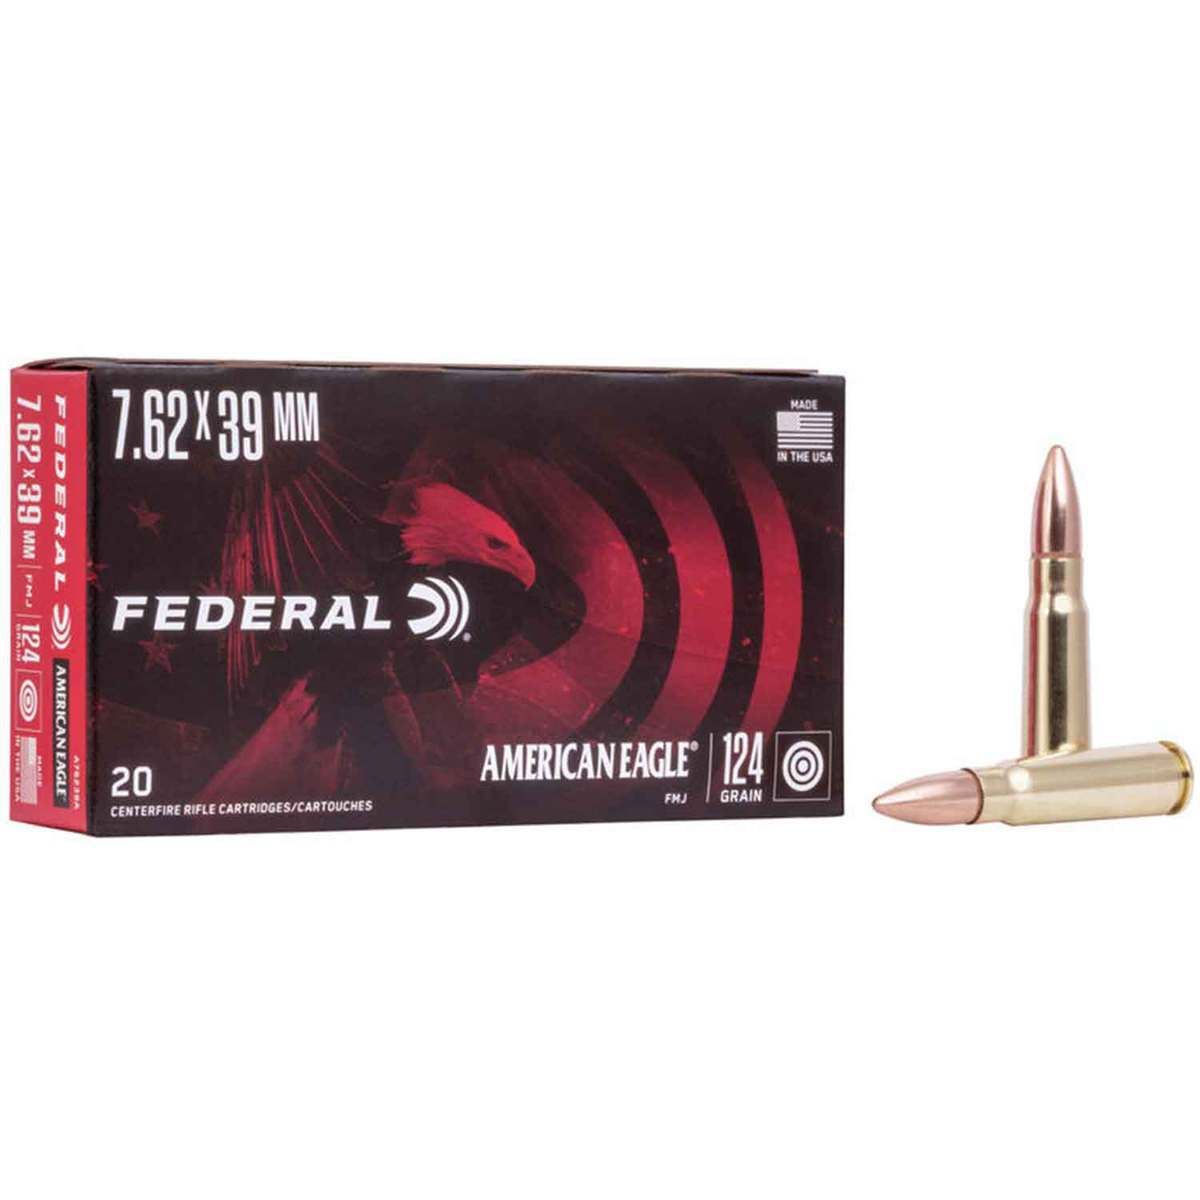 Federal American Eagle 7.62x39mm 124gr FMJ Rifle Ammo 20 Rounds  Sportsman's Warehouse